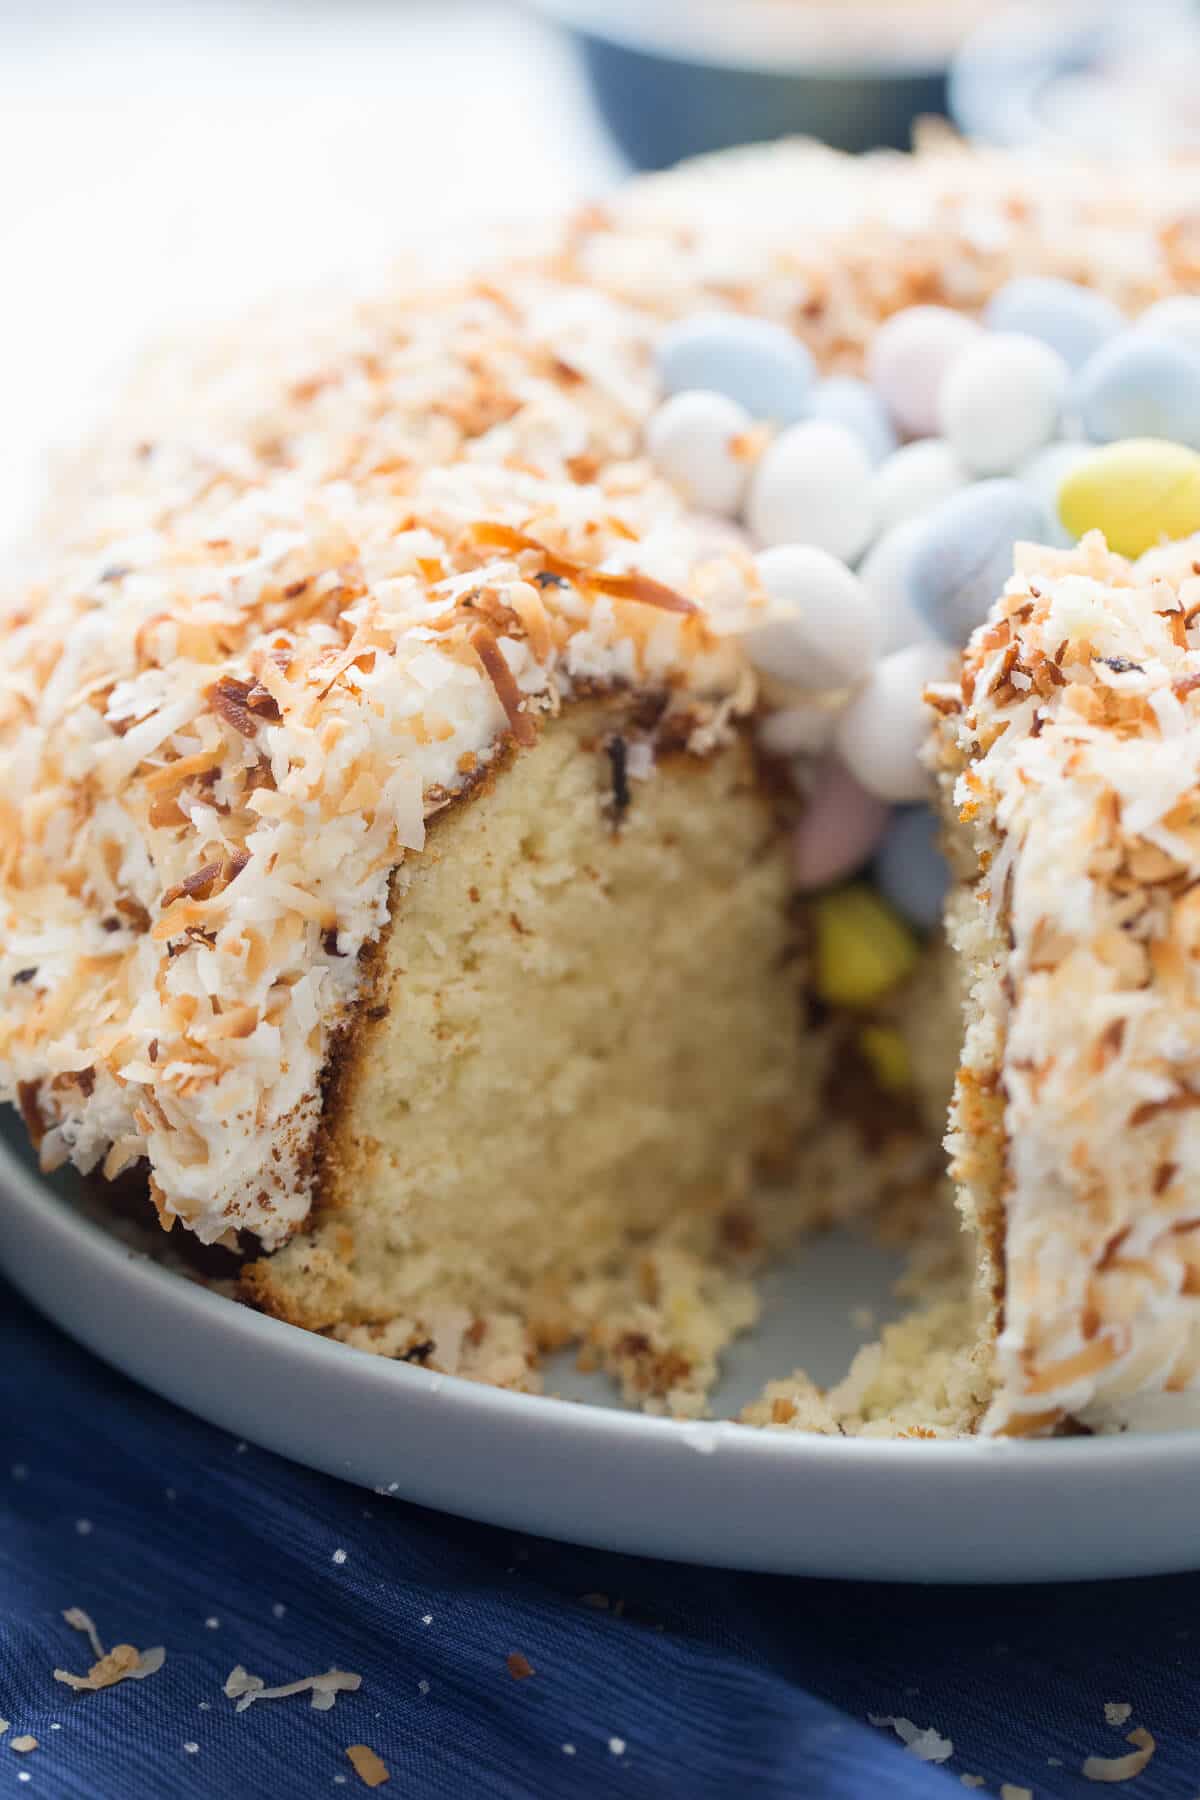 This is one impressive Easter lemon bundt cake! Toasted coconut is arranged with chocolate eggs to look just like a birds nest!